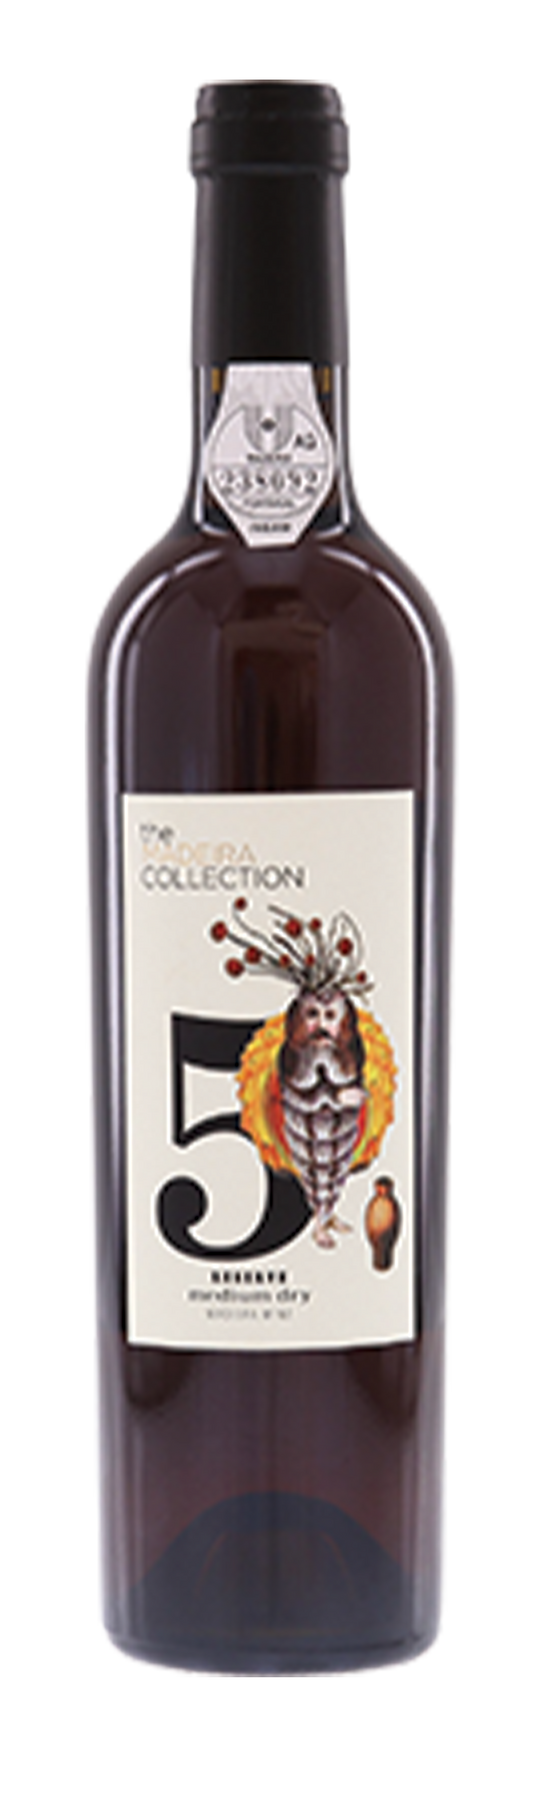 The Madeira Collection #5 20% 50cl